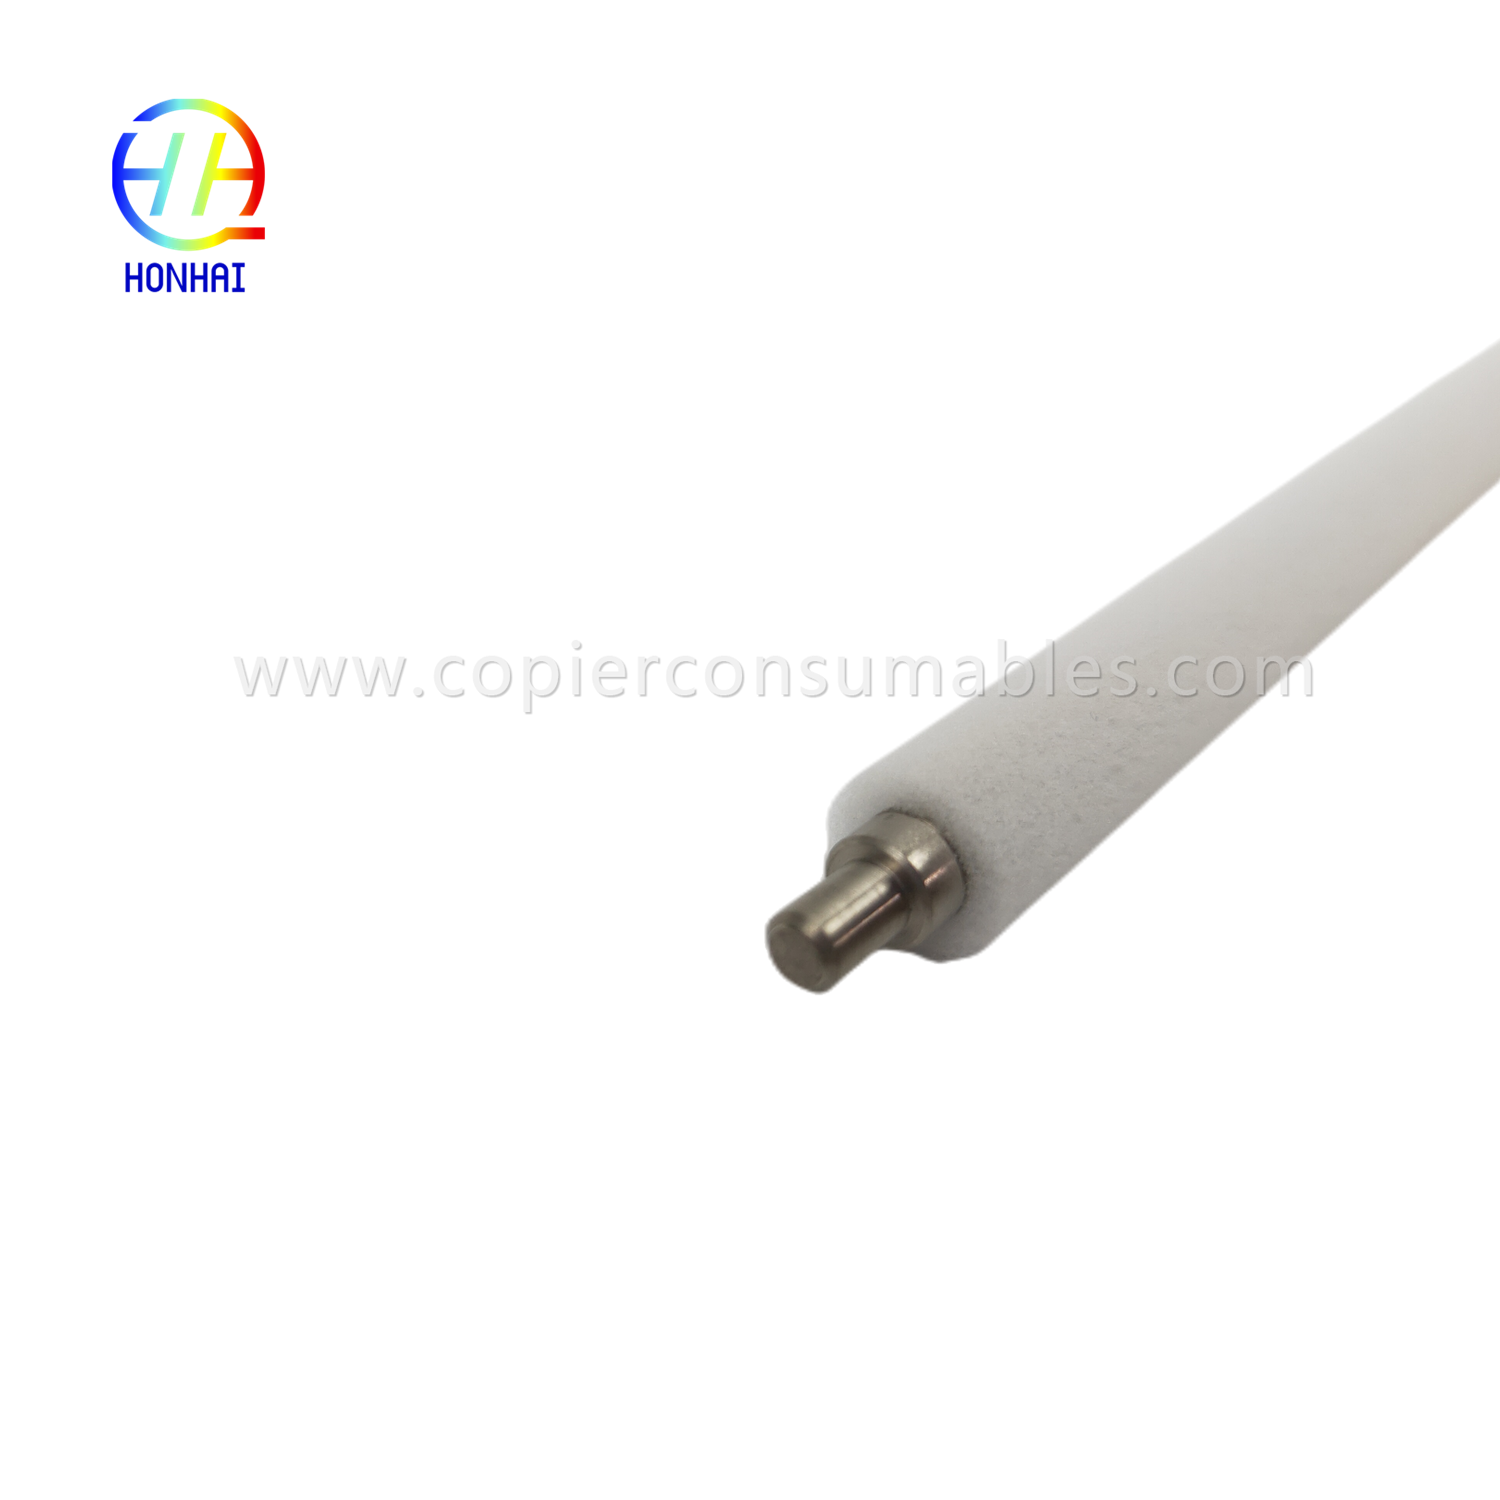 https://c585.goodo.net/pcr-cleaning-roller-for-ricoh-mpc3003-c3503-c4503-c5503-c6003-product/